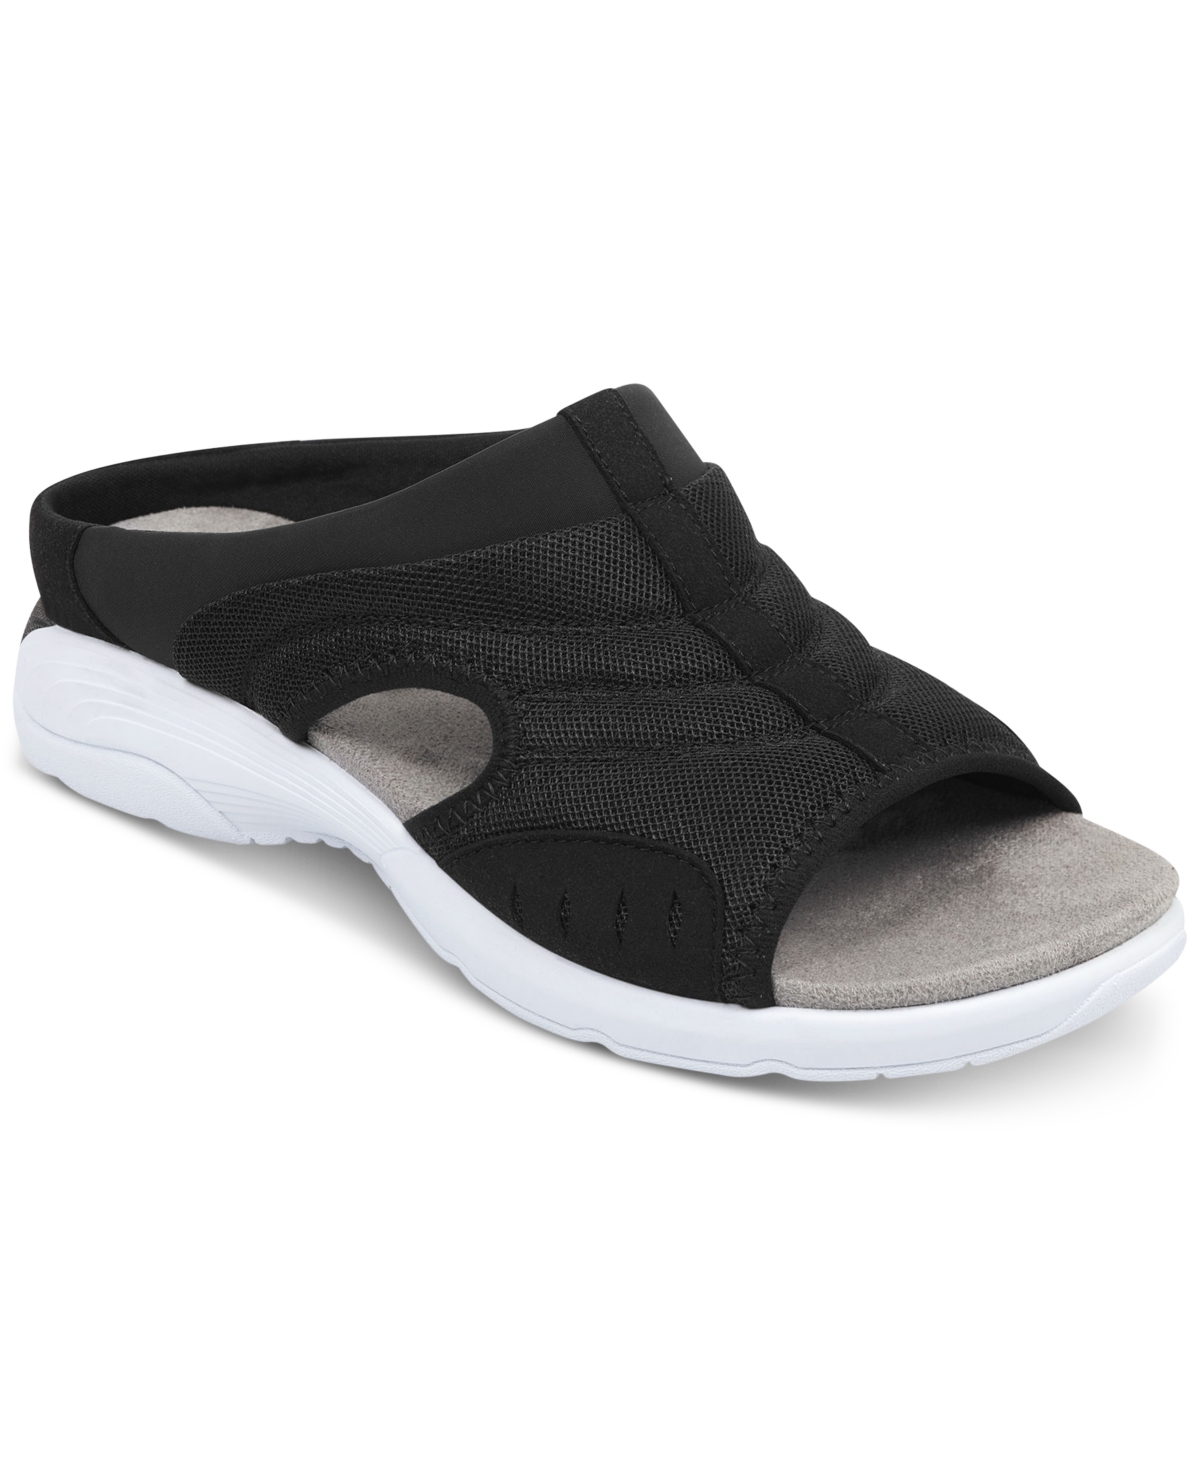 UPC 192733306365 product image for Easy Spirit Women's Traciee Square Toe Casual Flat Sandals Women's Shoes | upcitemdb.com